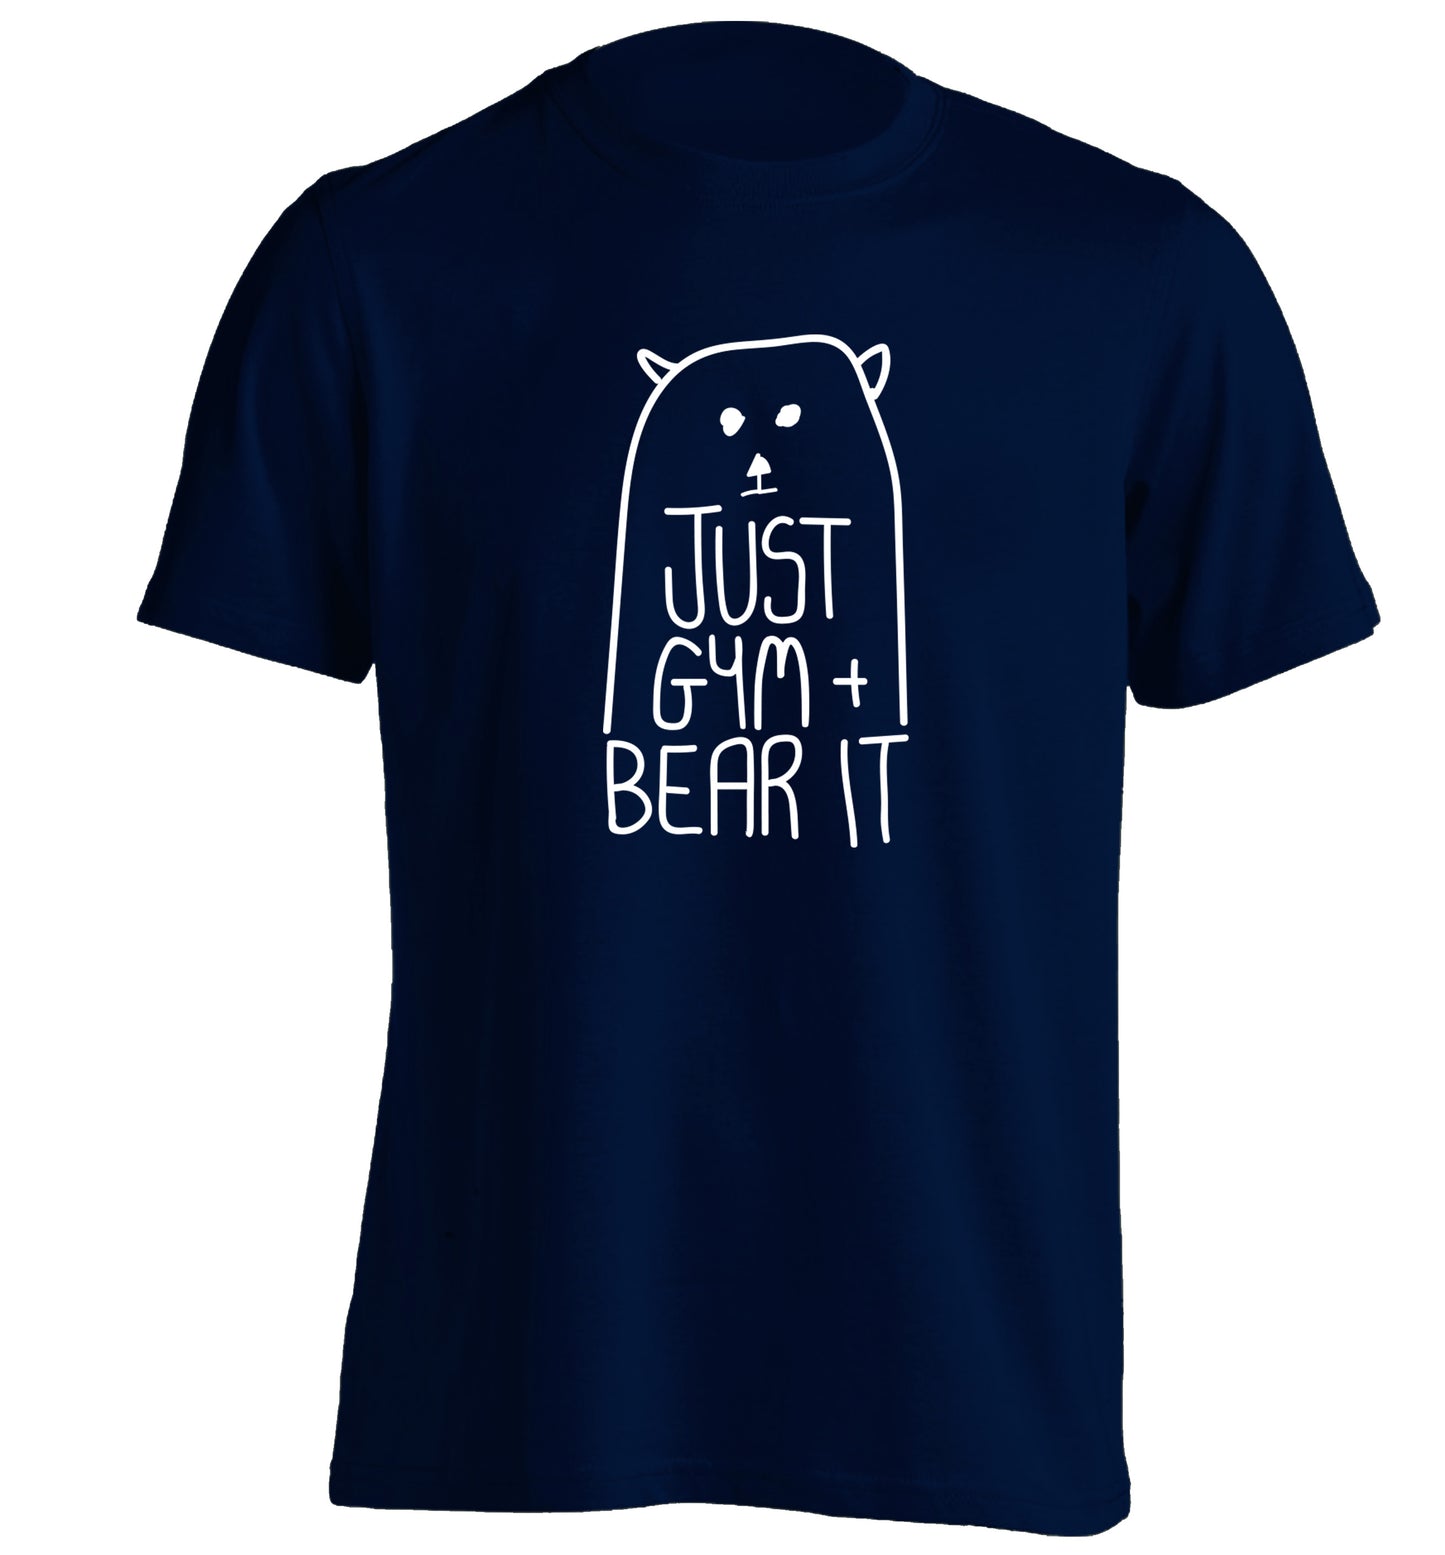 Just gym and bear it adults unisex navy Tshirt 2XL